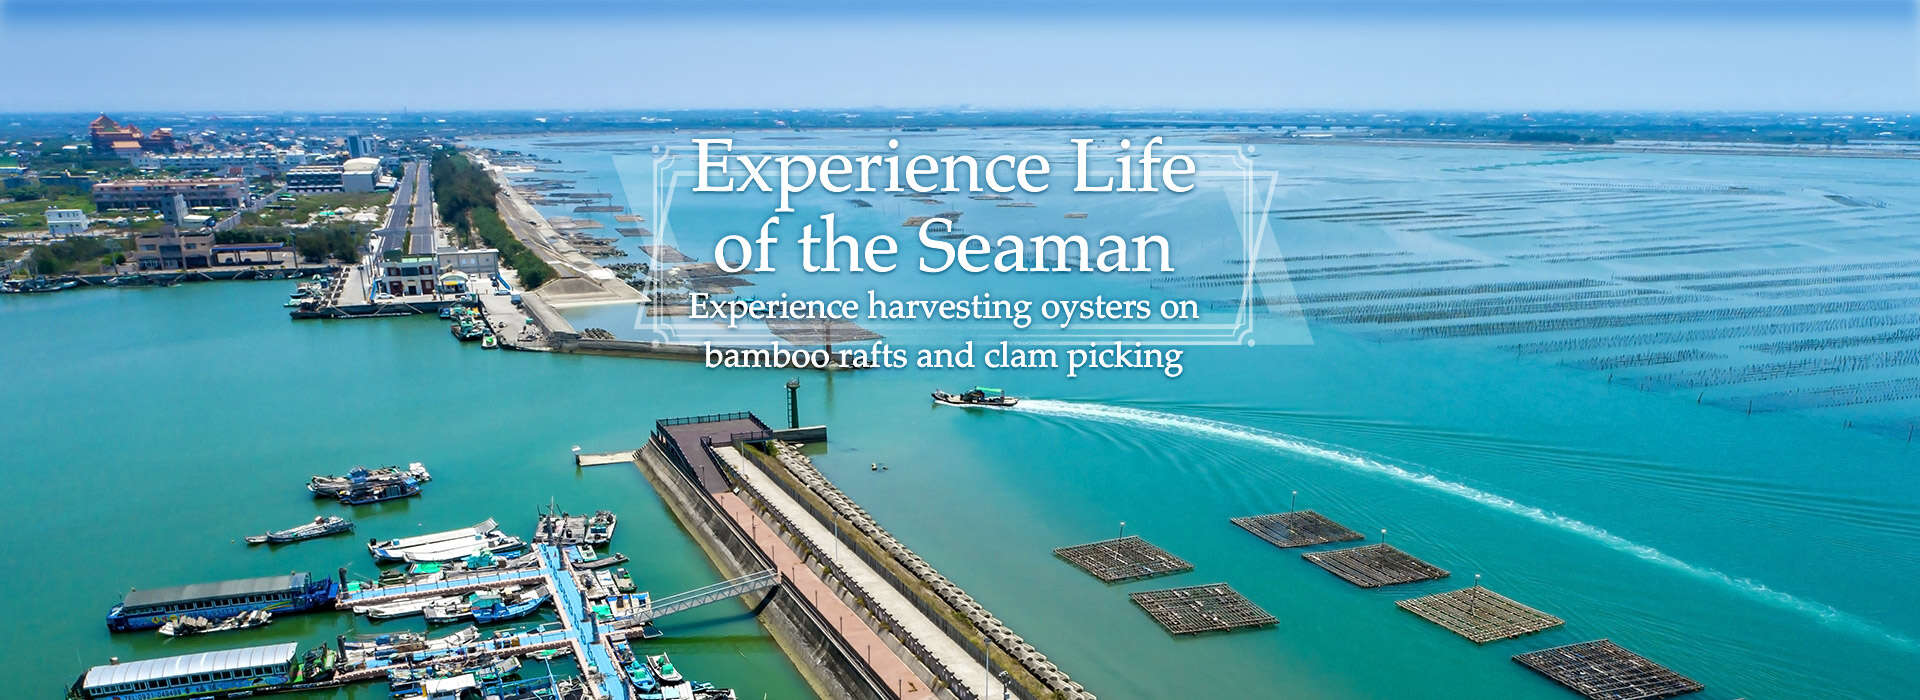 Experience Life of the Seaman